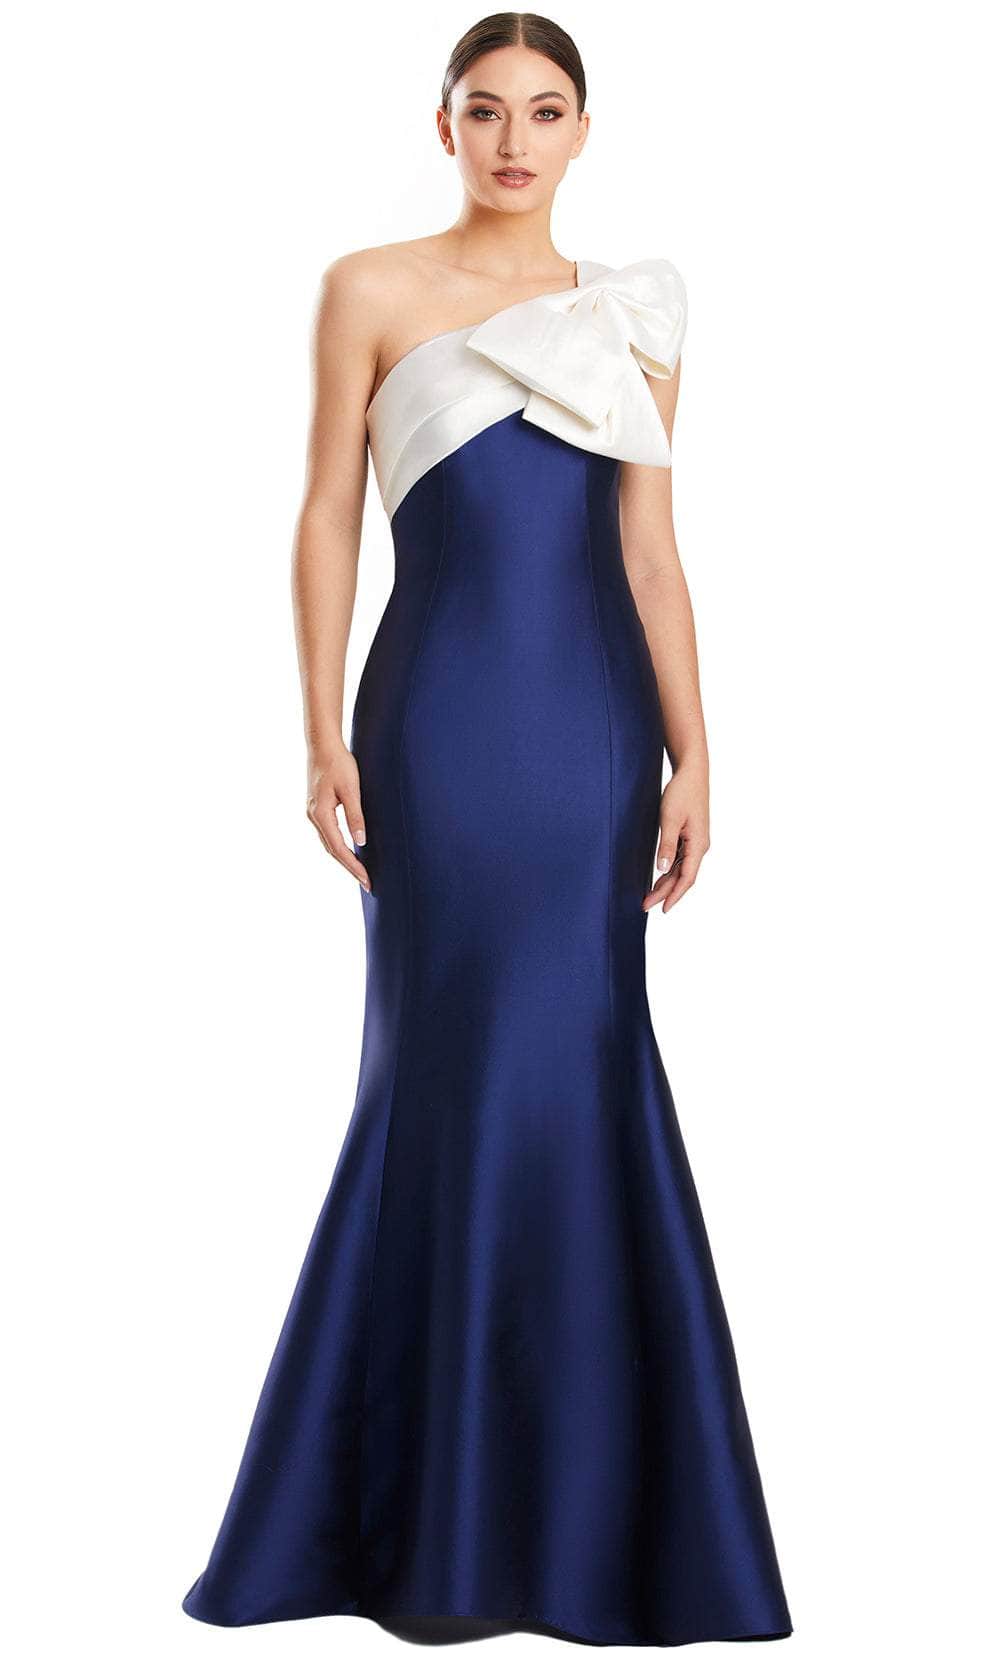 Alexander by Daymor 1850F23 - Bow Accent Asymmetric Evening Gown 00 / Navy/White